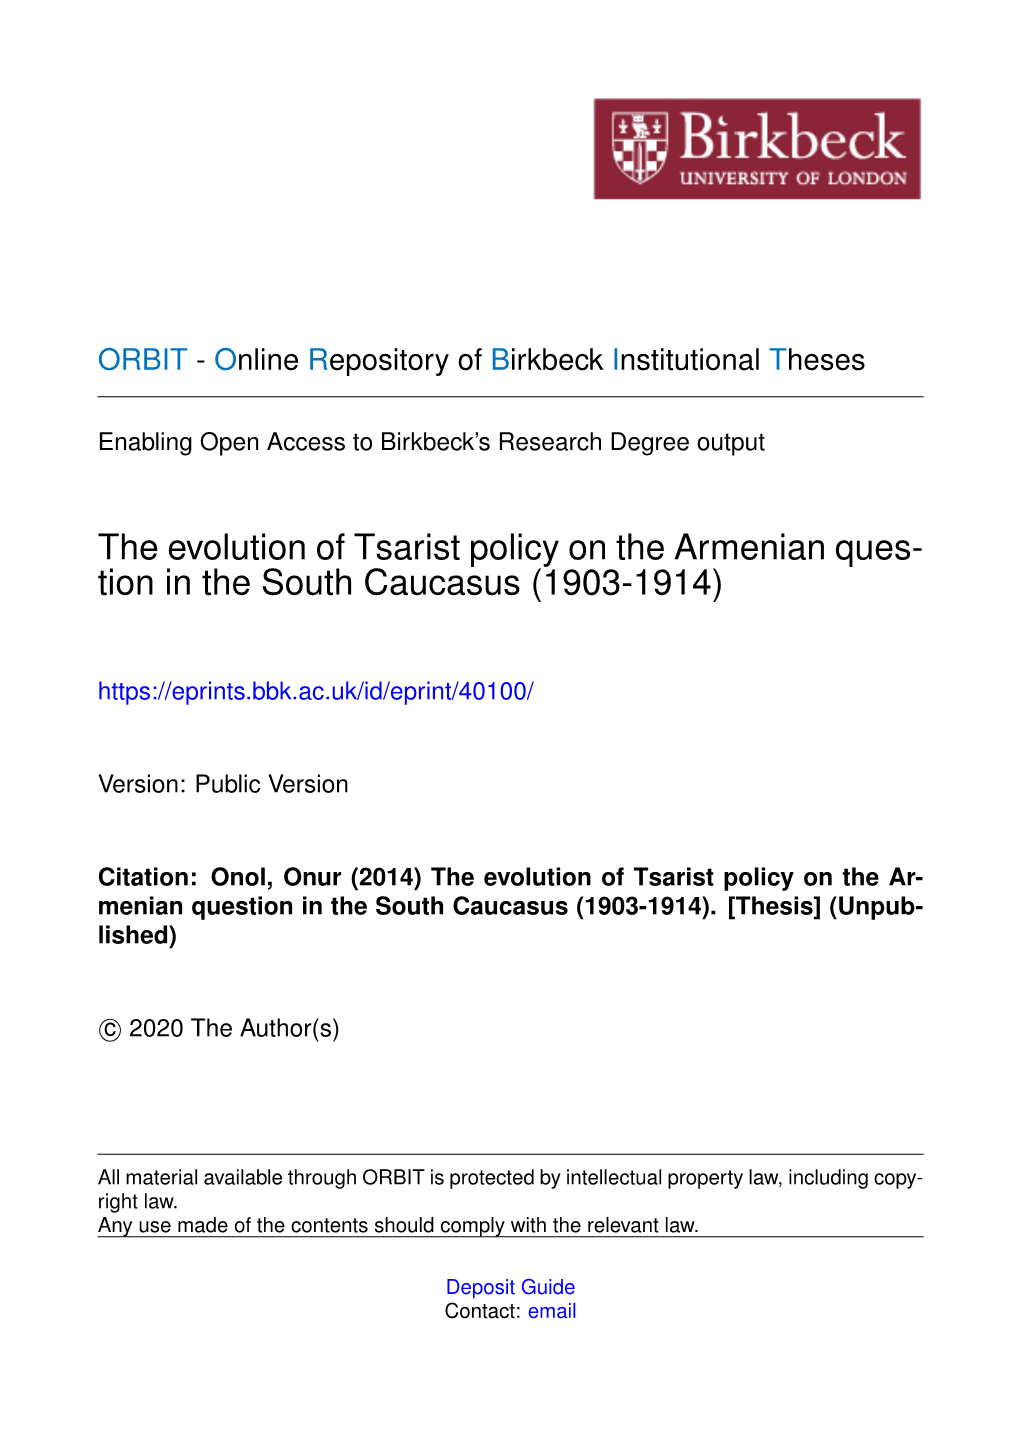 The Evolution of Tsarist Policy on the Armenian Ques- Tion in the South Caucasus (1903-1914)